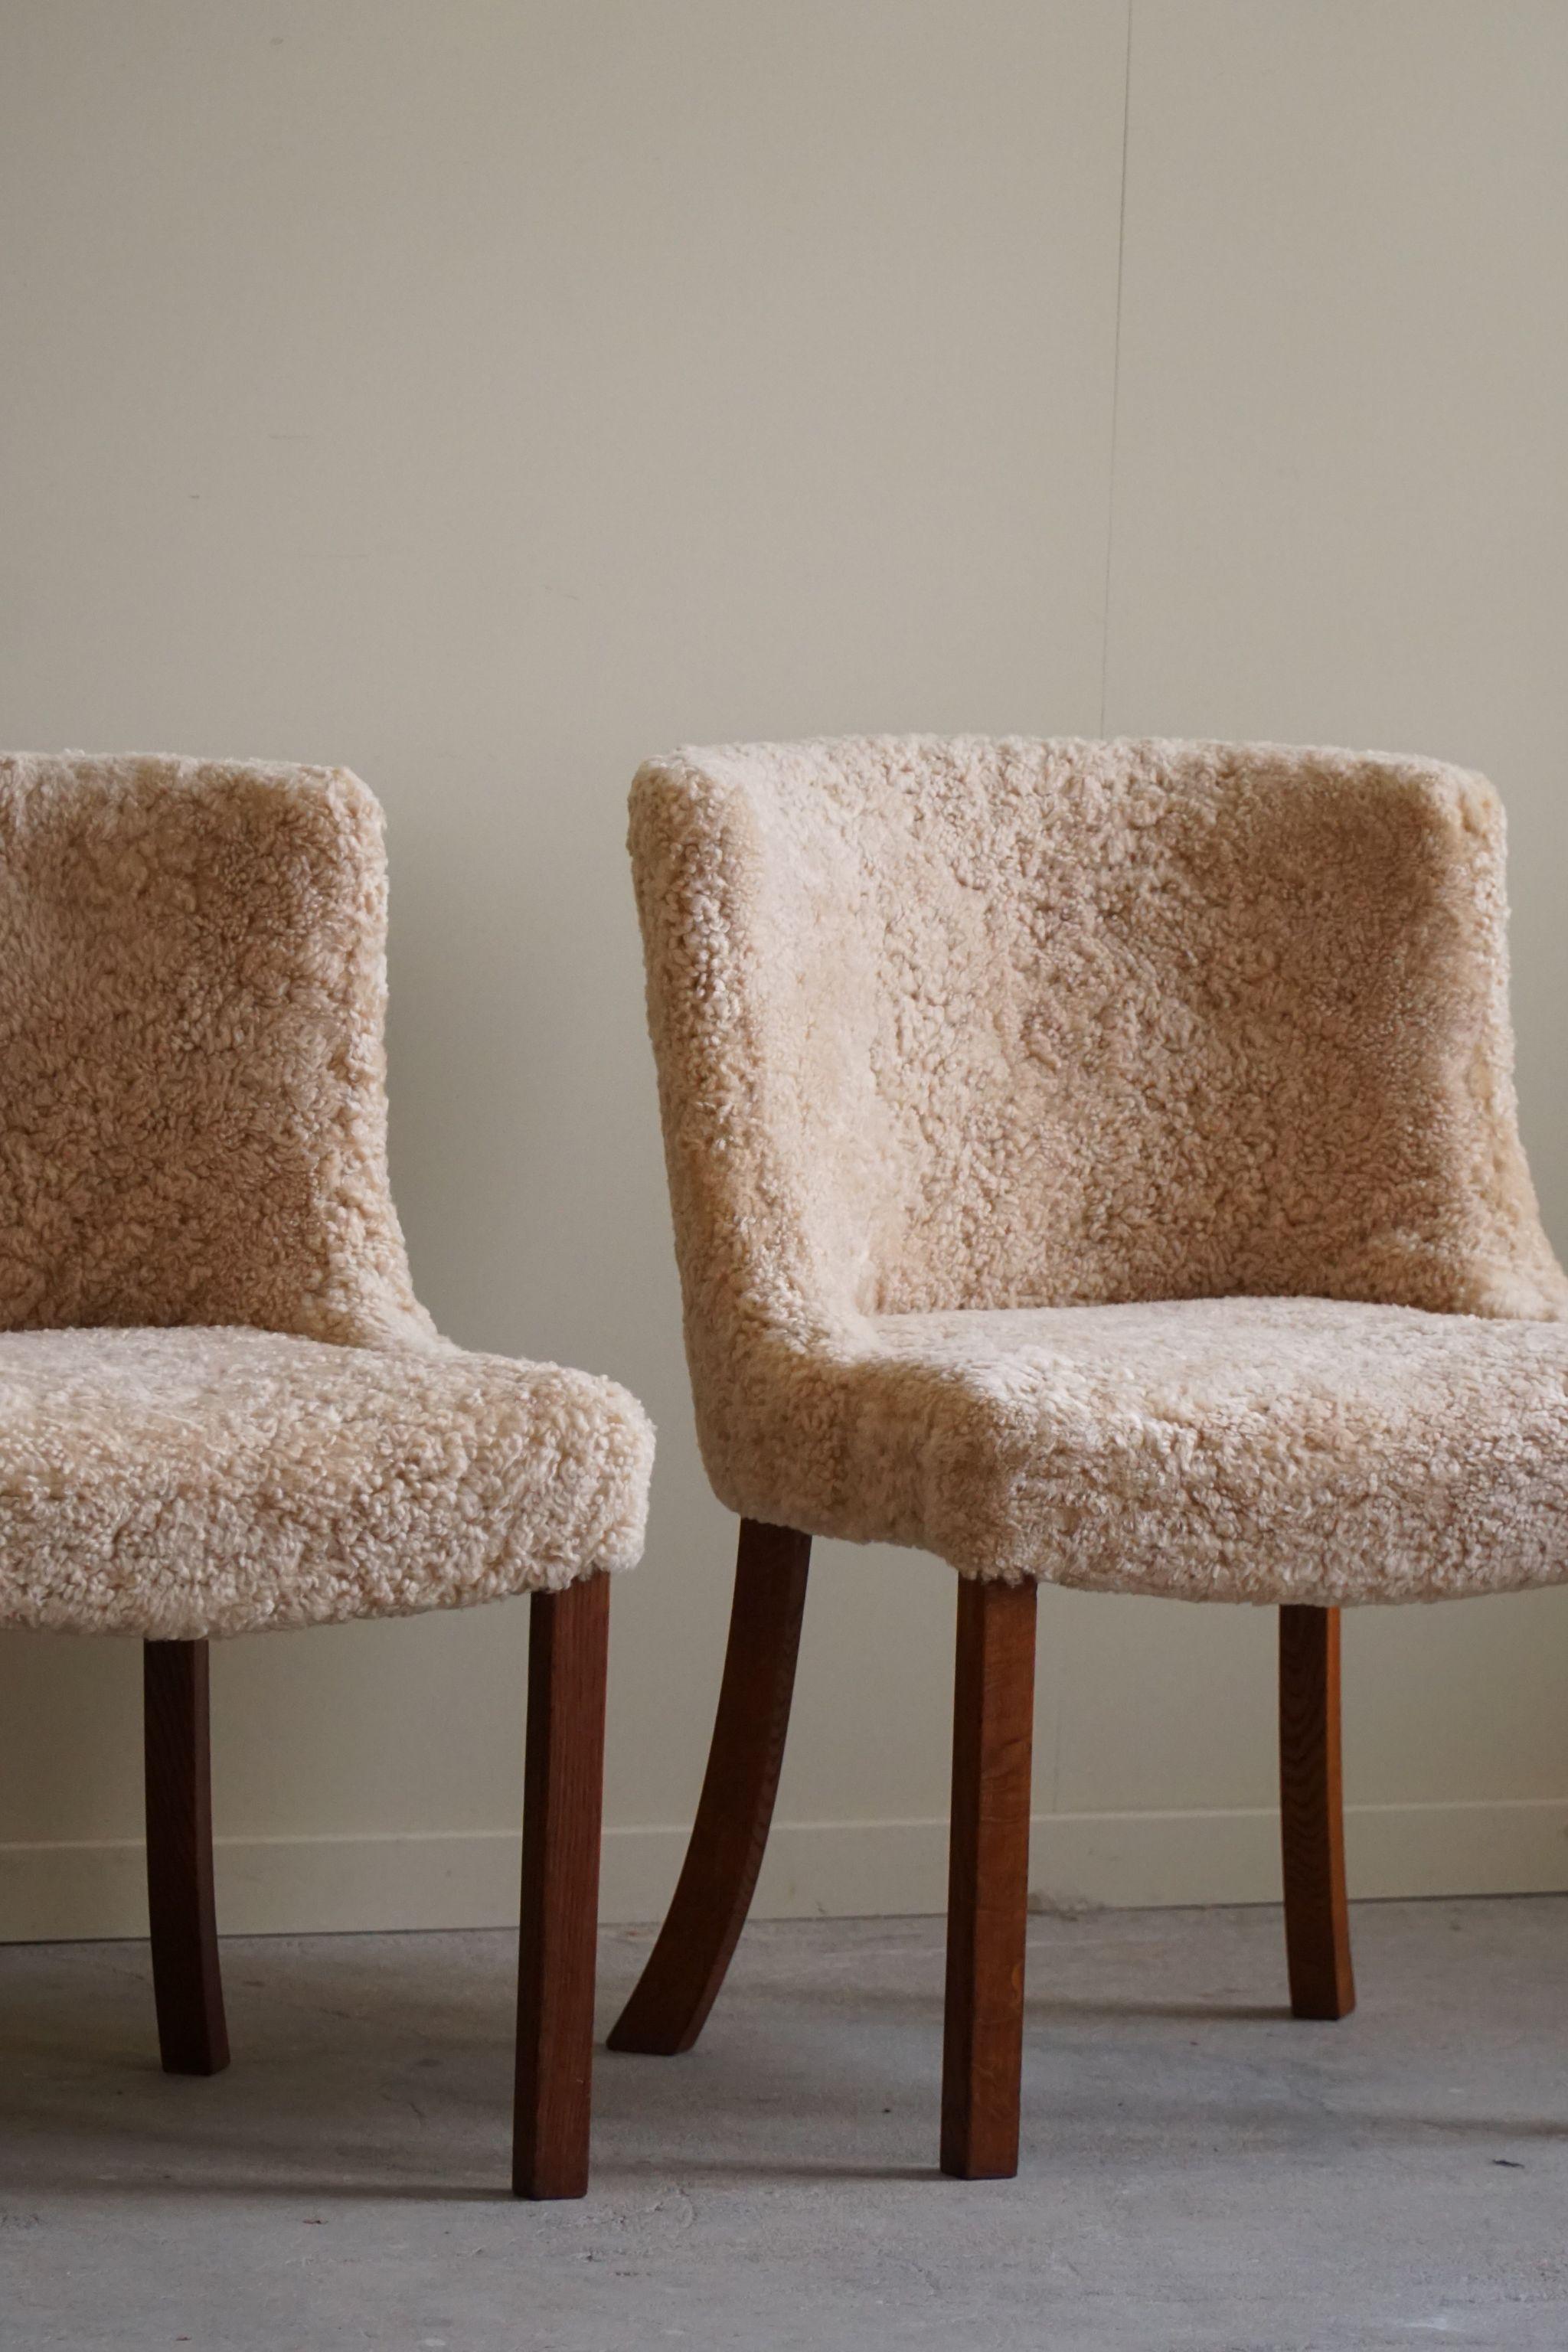 A Pair of Classic Chairs in Oak and Lambswool, Danish Modern, Kaj Gottlob, 1950s In Good Condition For Sale In Odense, DK